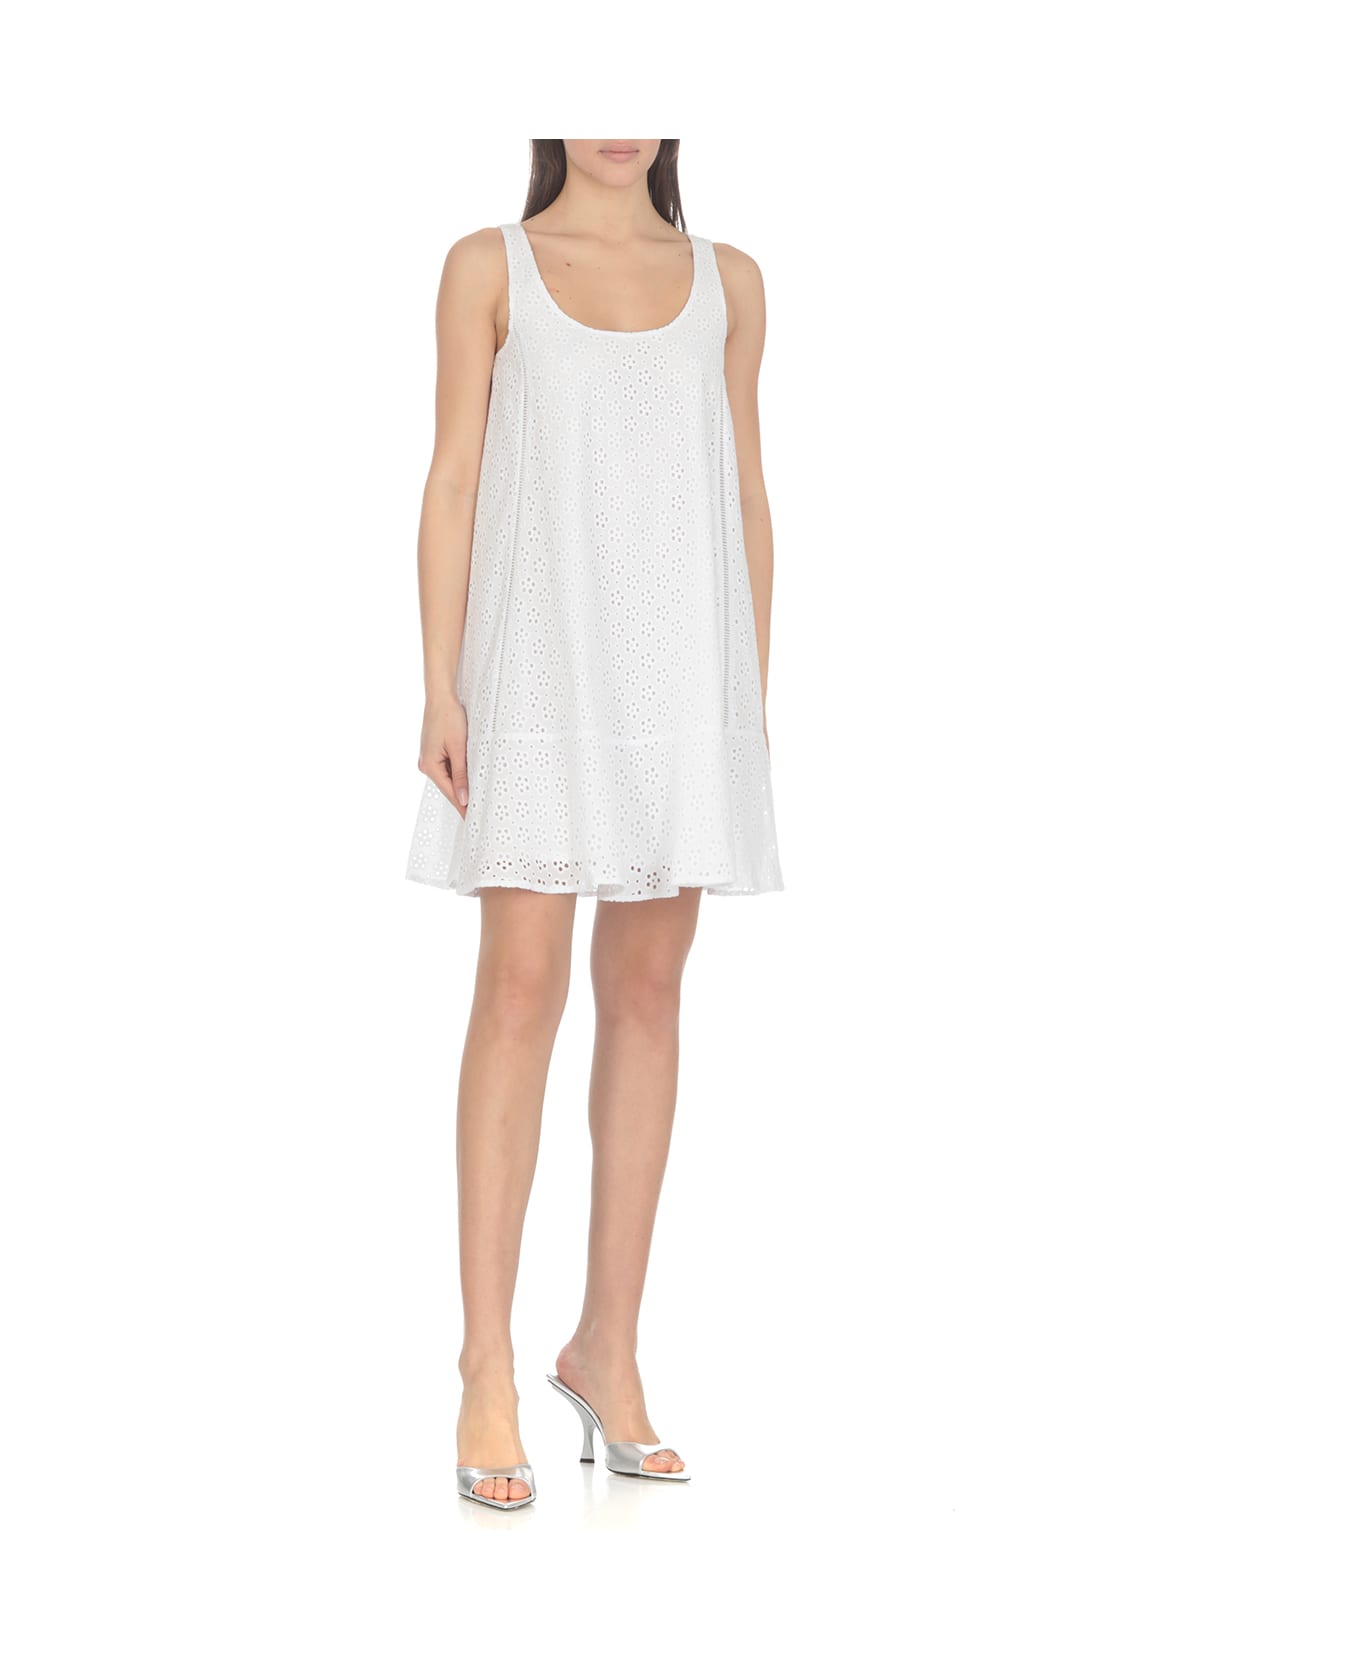 Kenzo Broderie Anglaise Dress - White